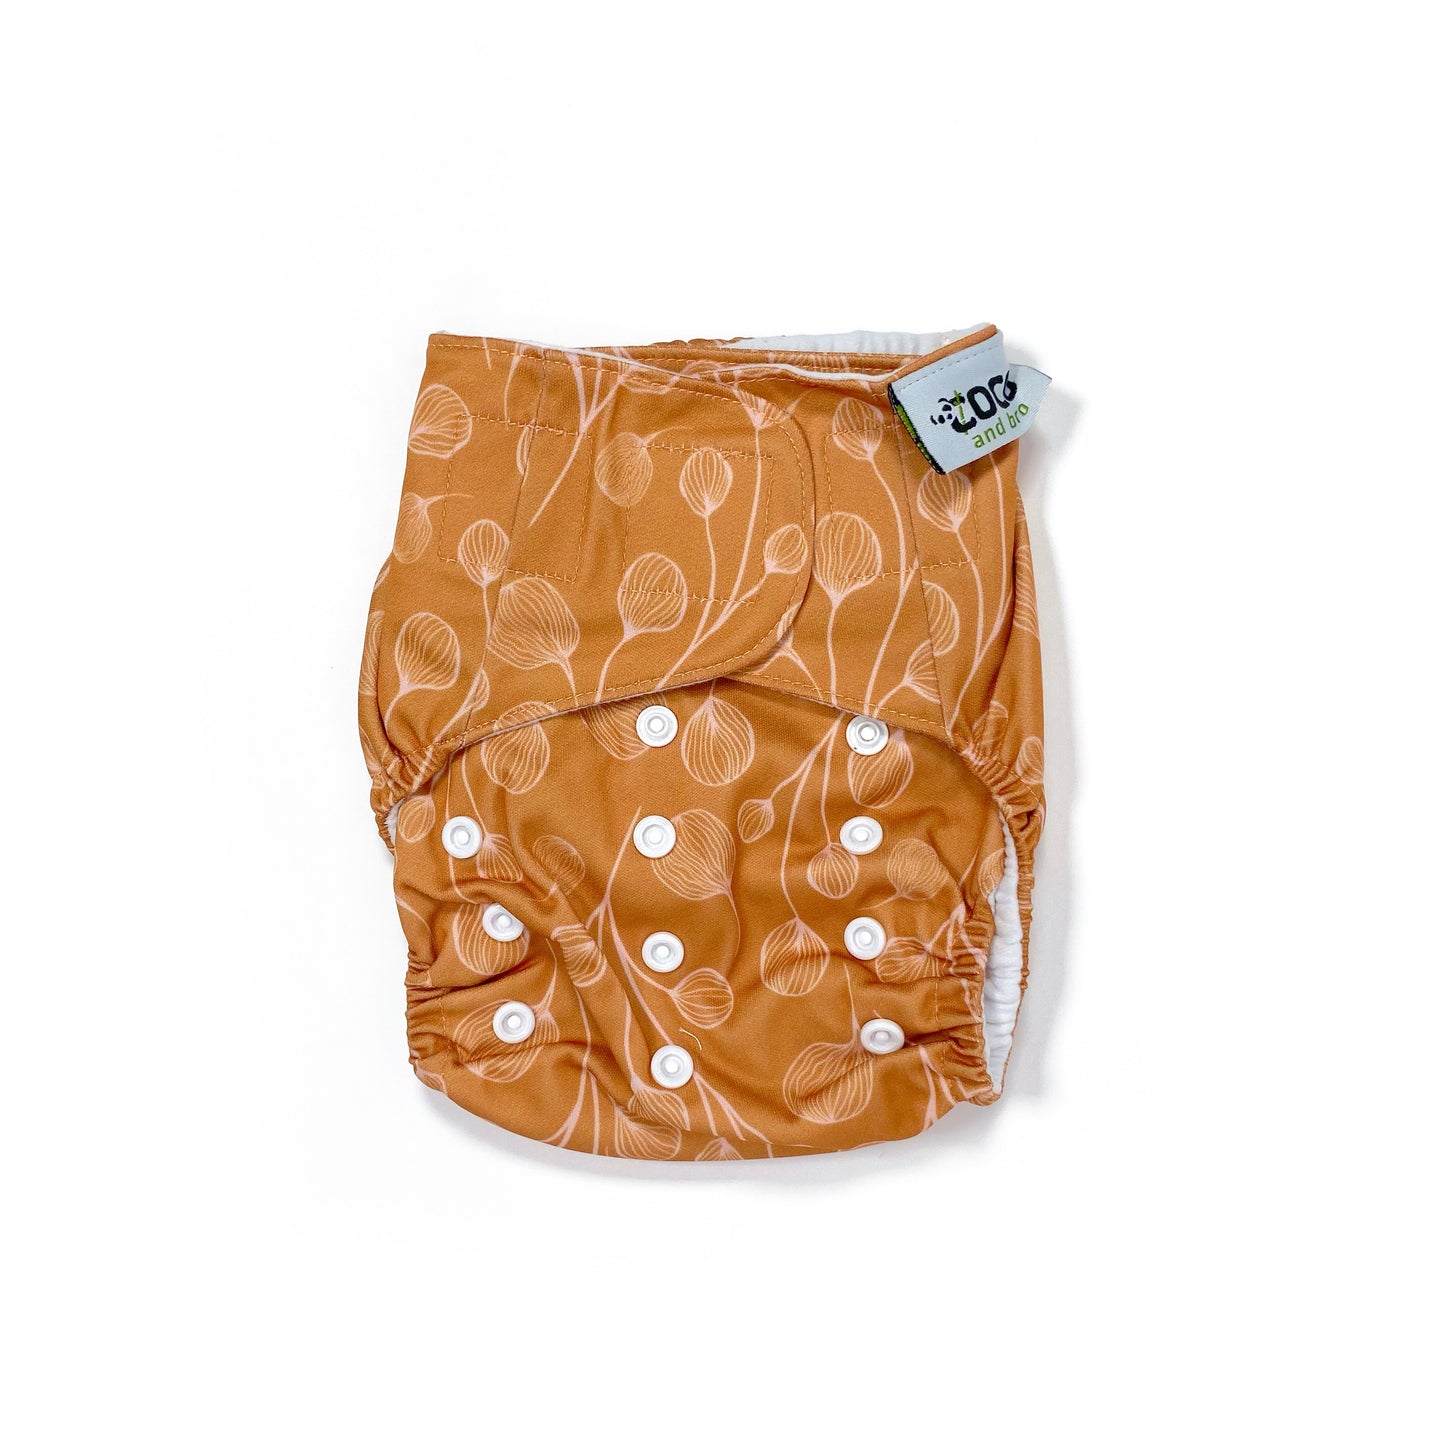 An adjustable reusable nappy for babies and toddlers, featuring a floral copper design, with floral images on a copper background. View shows the front of the nappy, with fastenings closed.